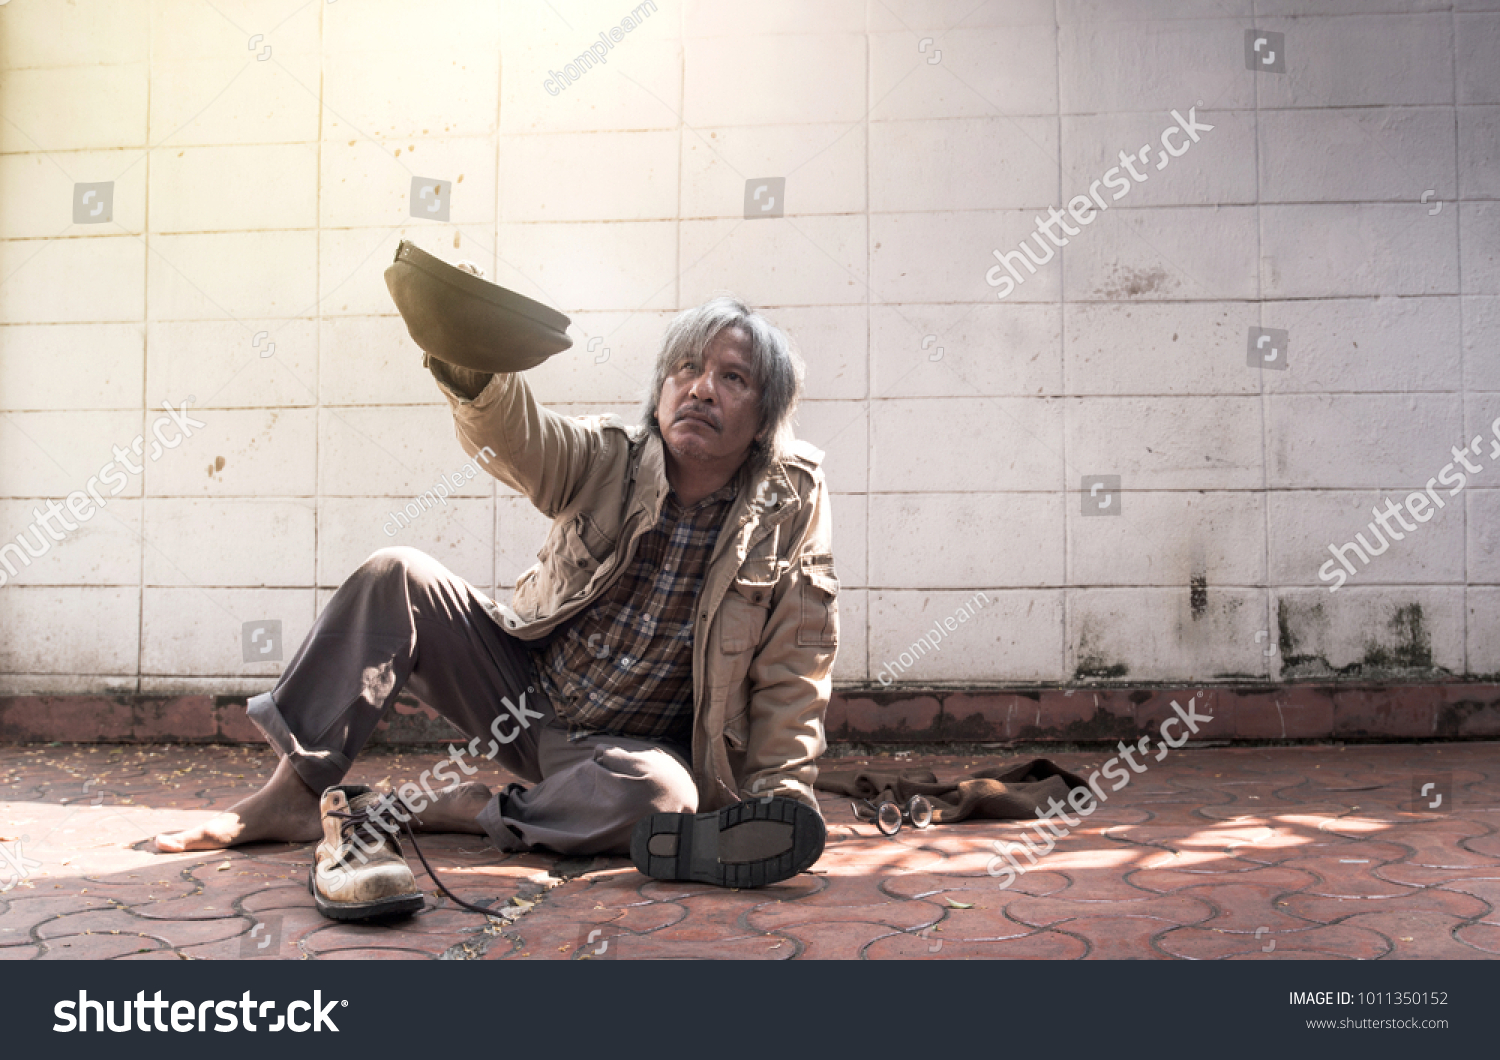 homeless and hungry vagrant holding a cup, asking for money and food #1011350152